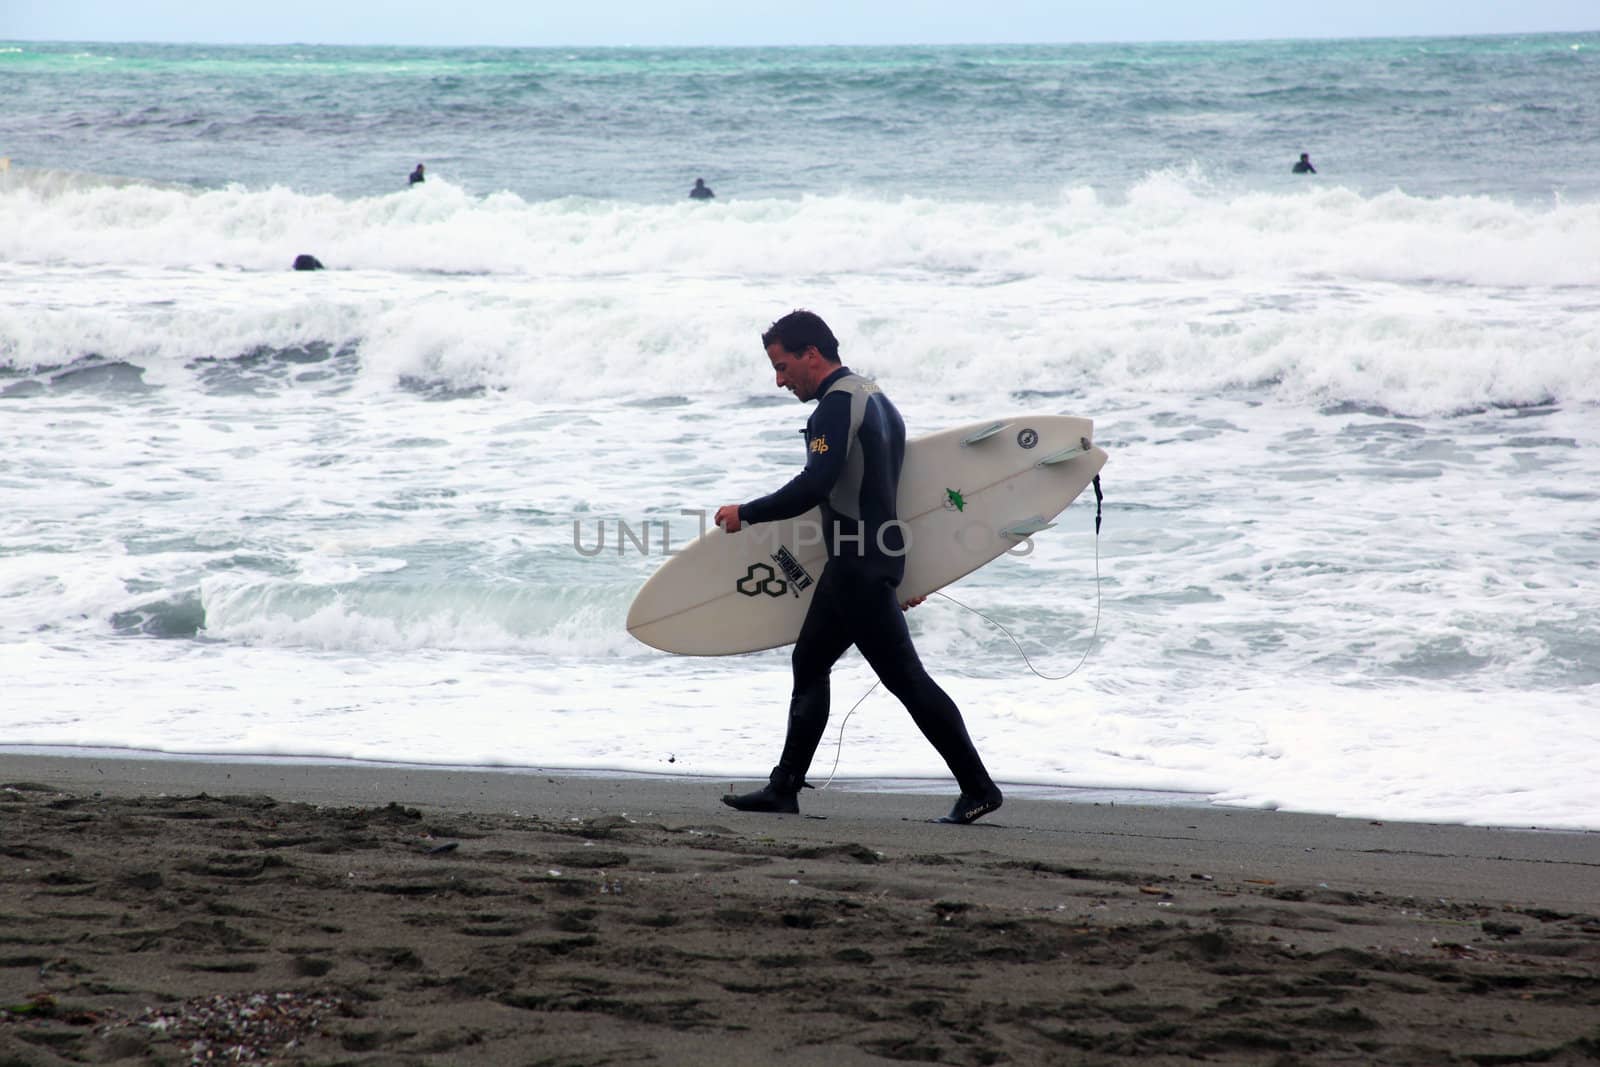 Surfer on the beach in Levanto, opening the performances season by adrianocastelli